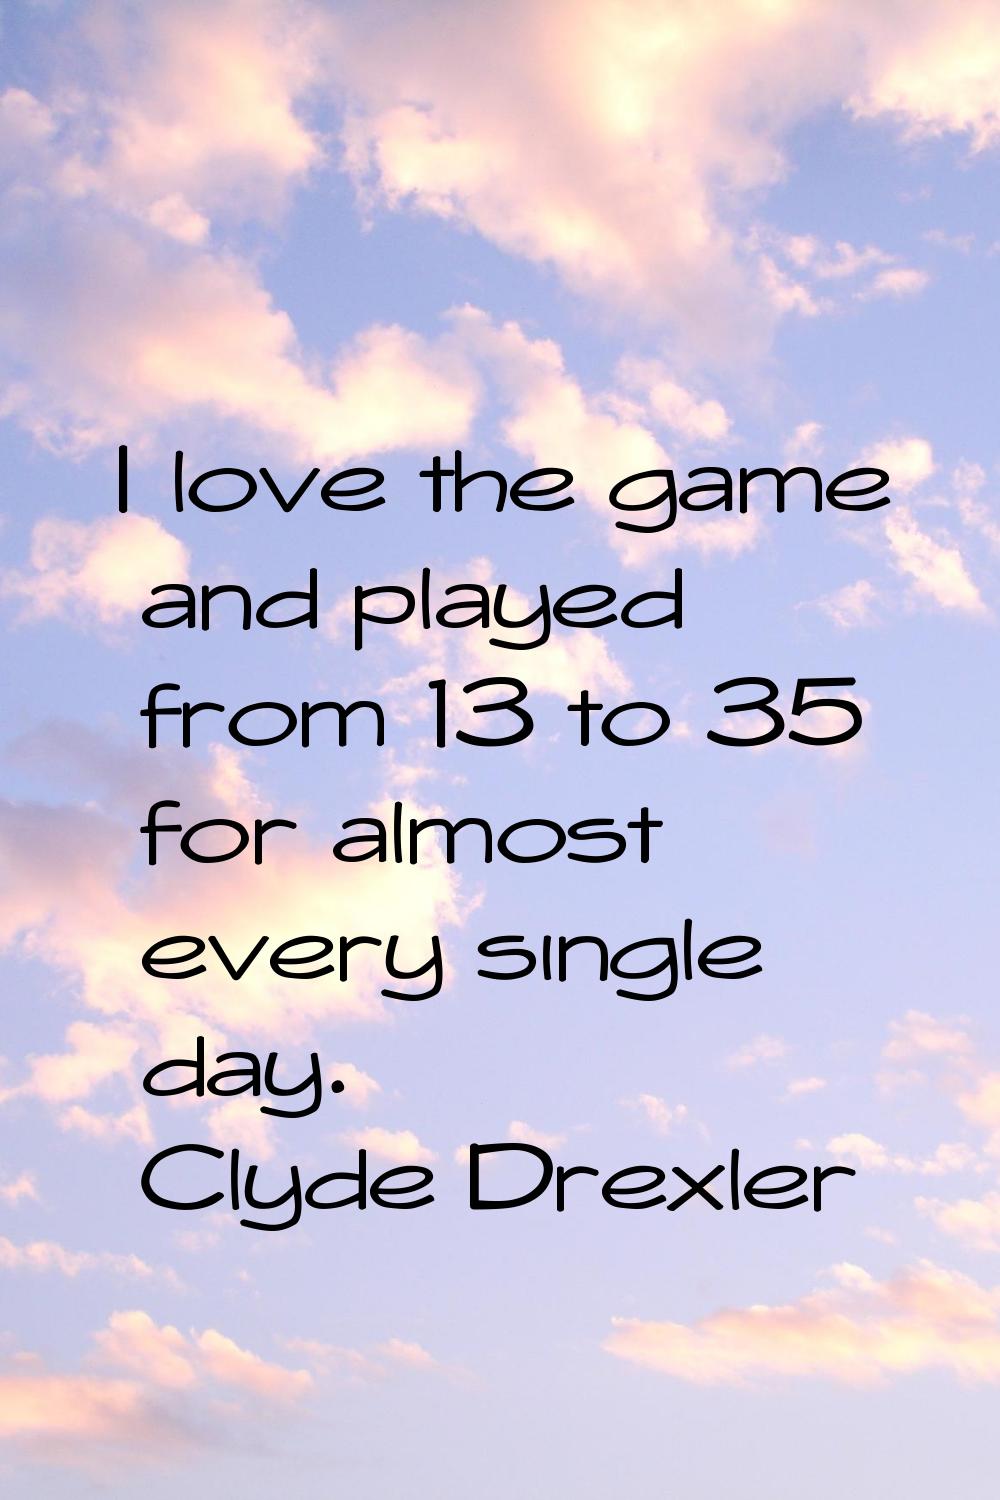 I love the game and played from 13 to 35 for almost every single day.